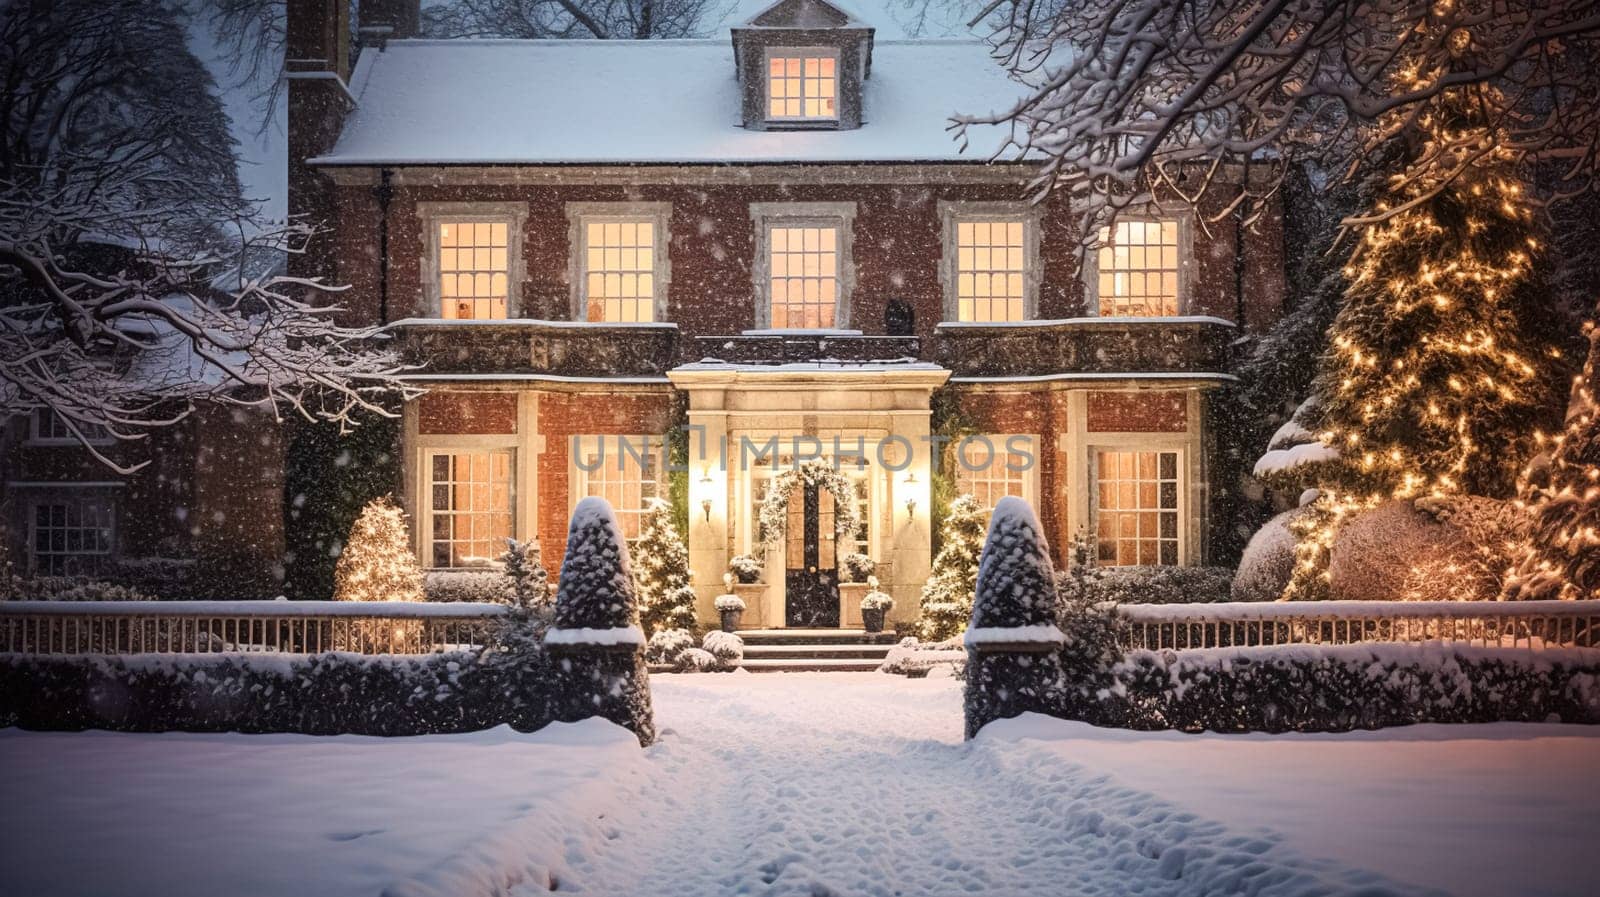 Christmas in the countryside manor, English country house mansion decorated for holidays on a snowy winter evening with snow and holiday lights, Merry Christmas and Happy Holidays by Anneleven